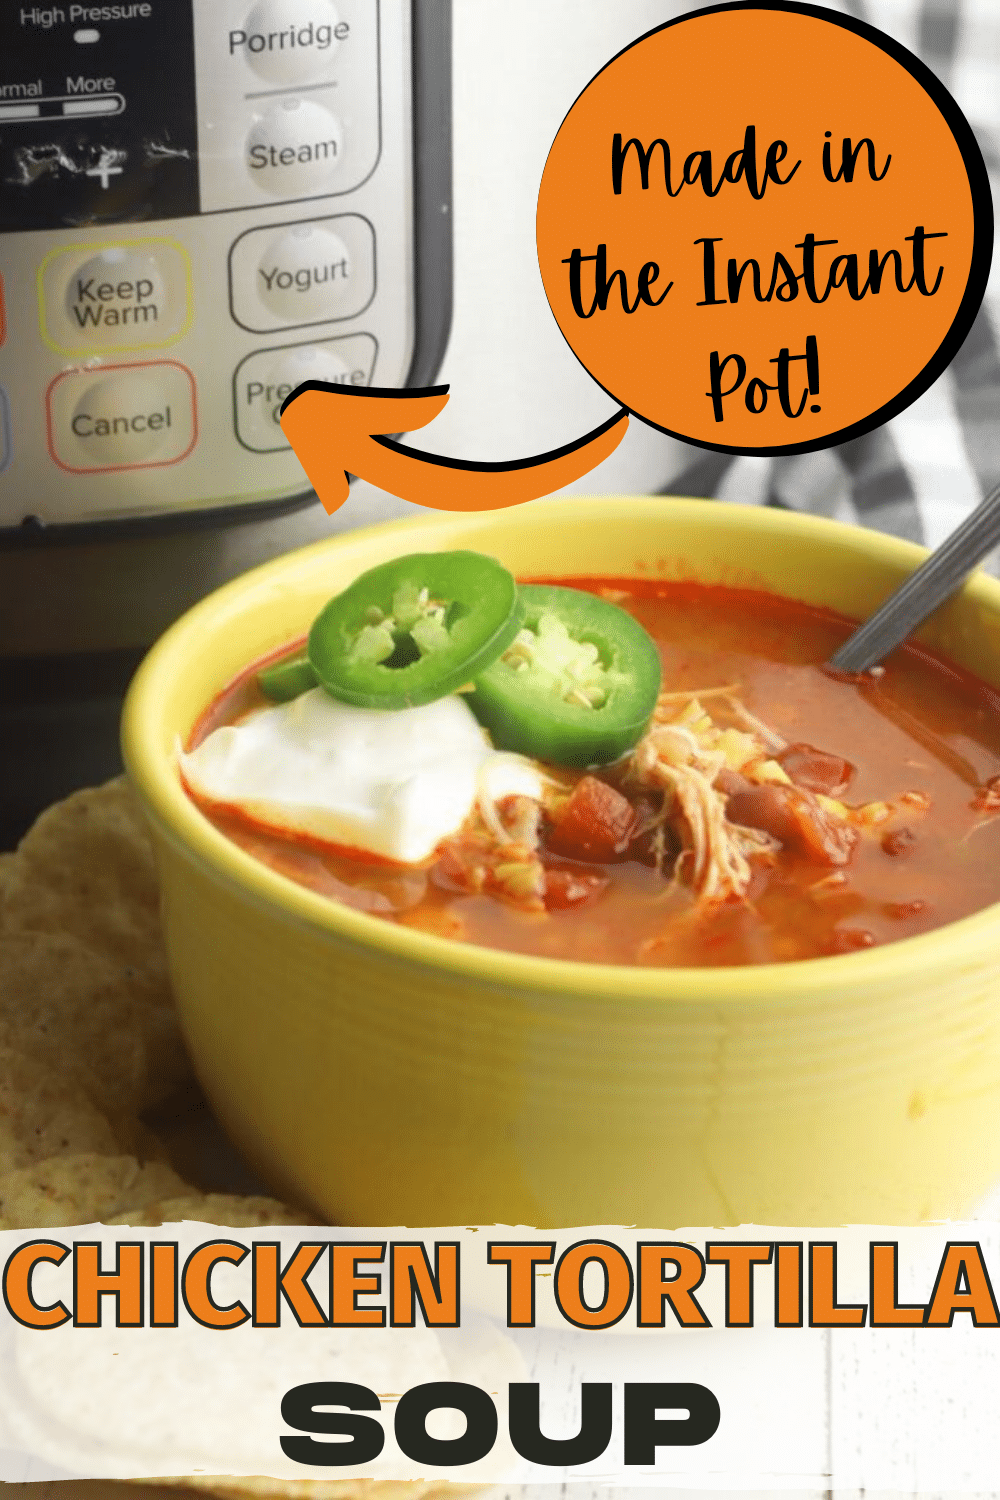 Instant pot chicken tortilla soup is easy to make at home. Loaded with beans and vegetables, you'll love the spicy mexican tortilla soup. #chickentortillasoup #tortillasoup #chicken #soup #mexicanfood via @wondermomwannab